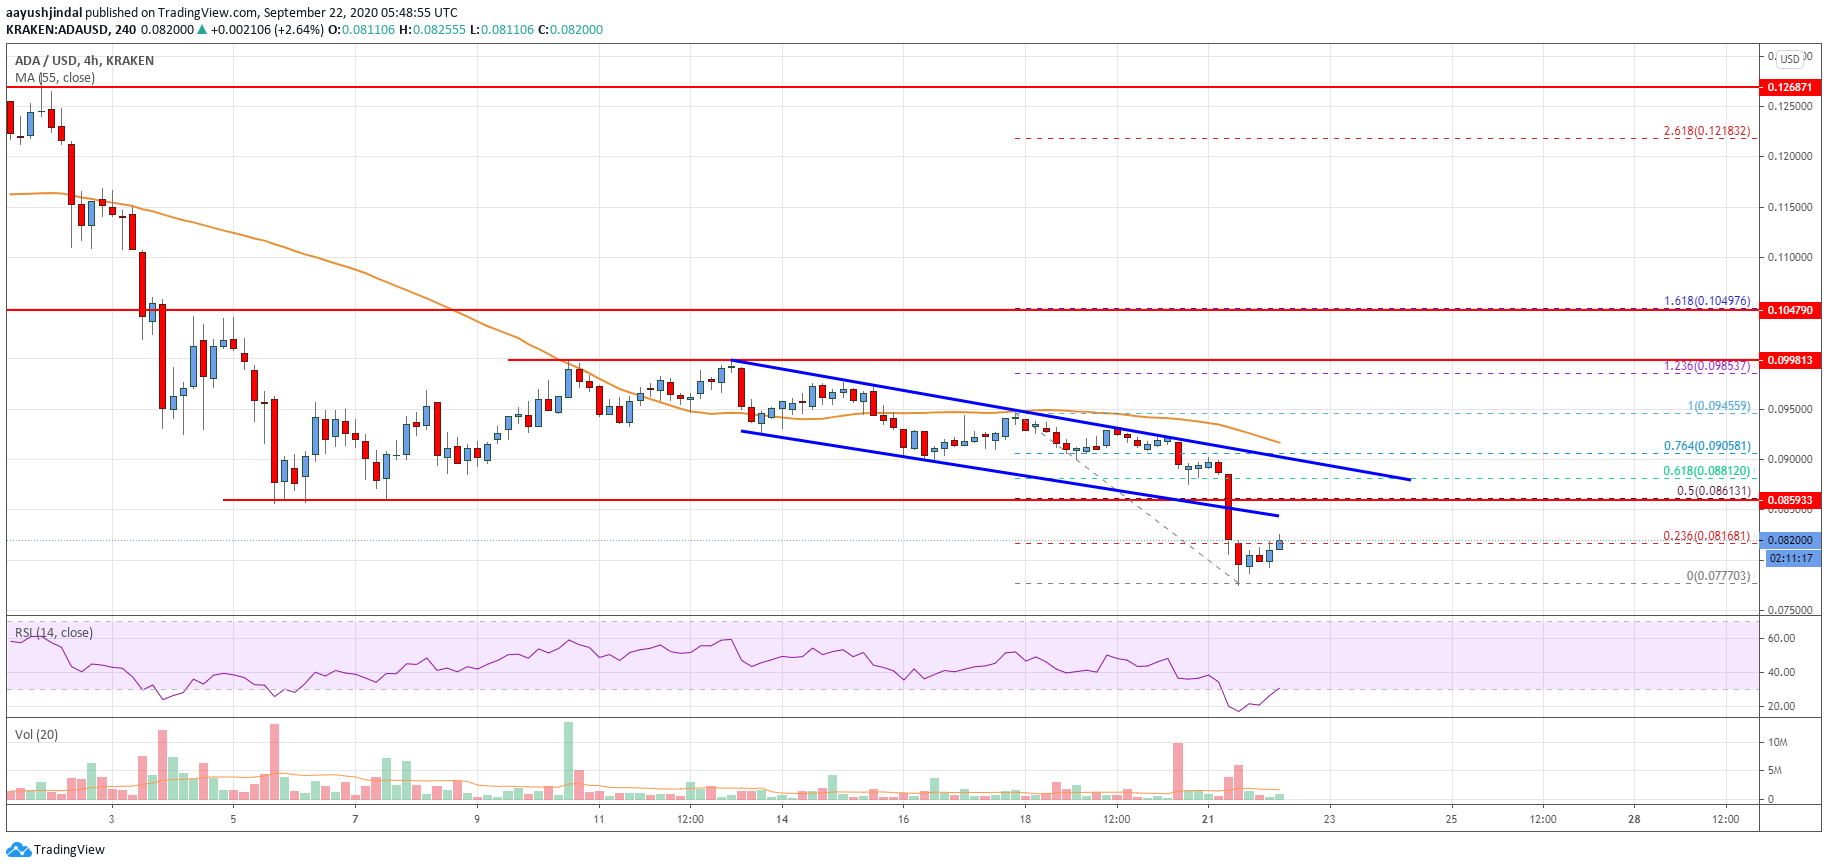 Cardano (ADA) Price Analysis: More Losses Likely Below $0.07